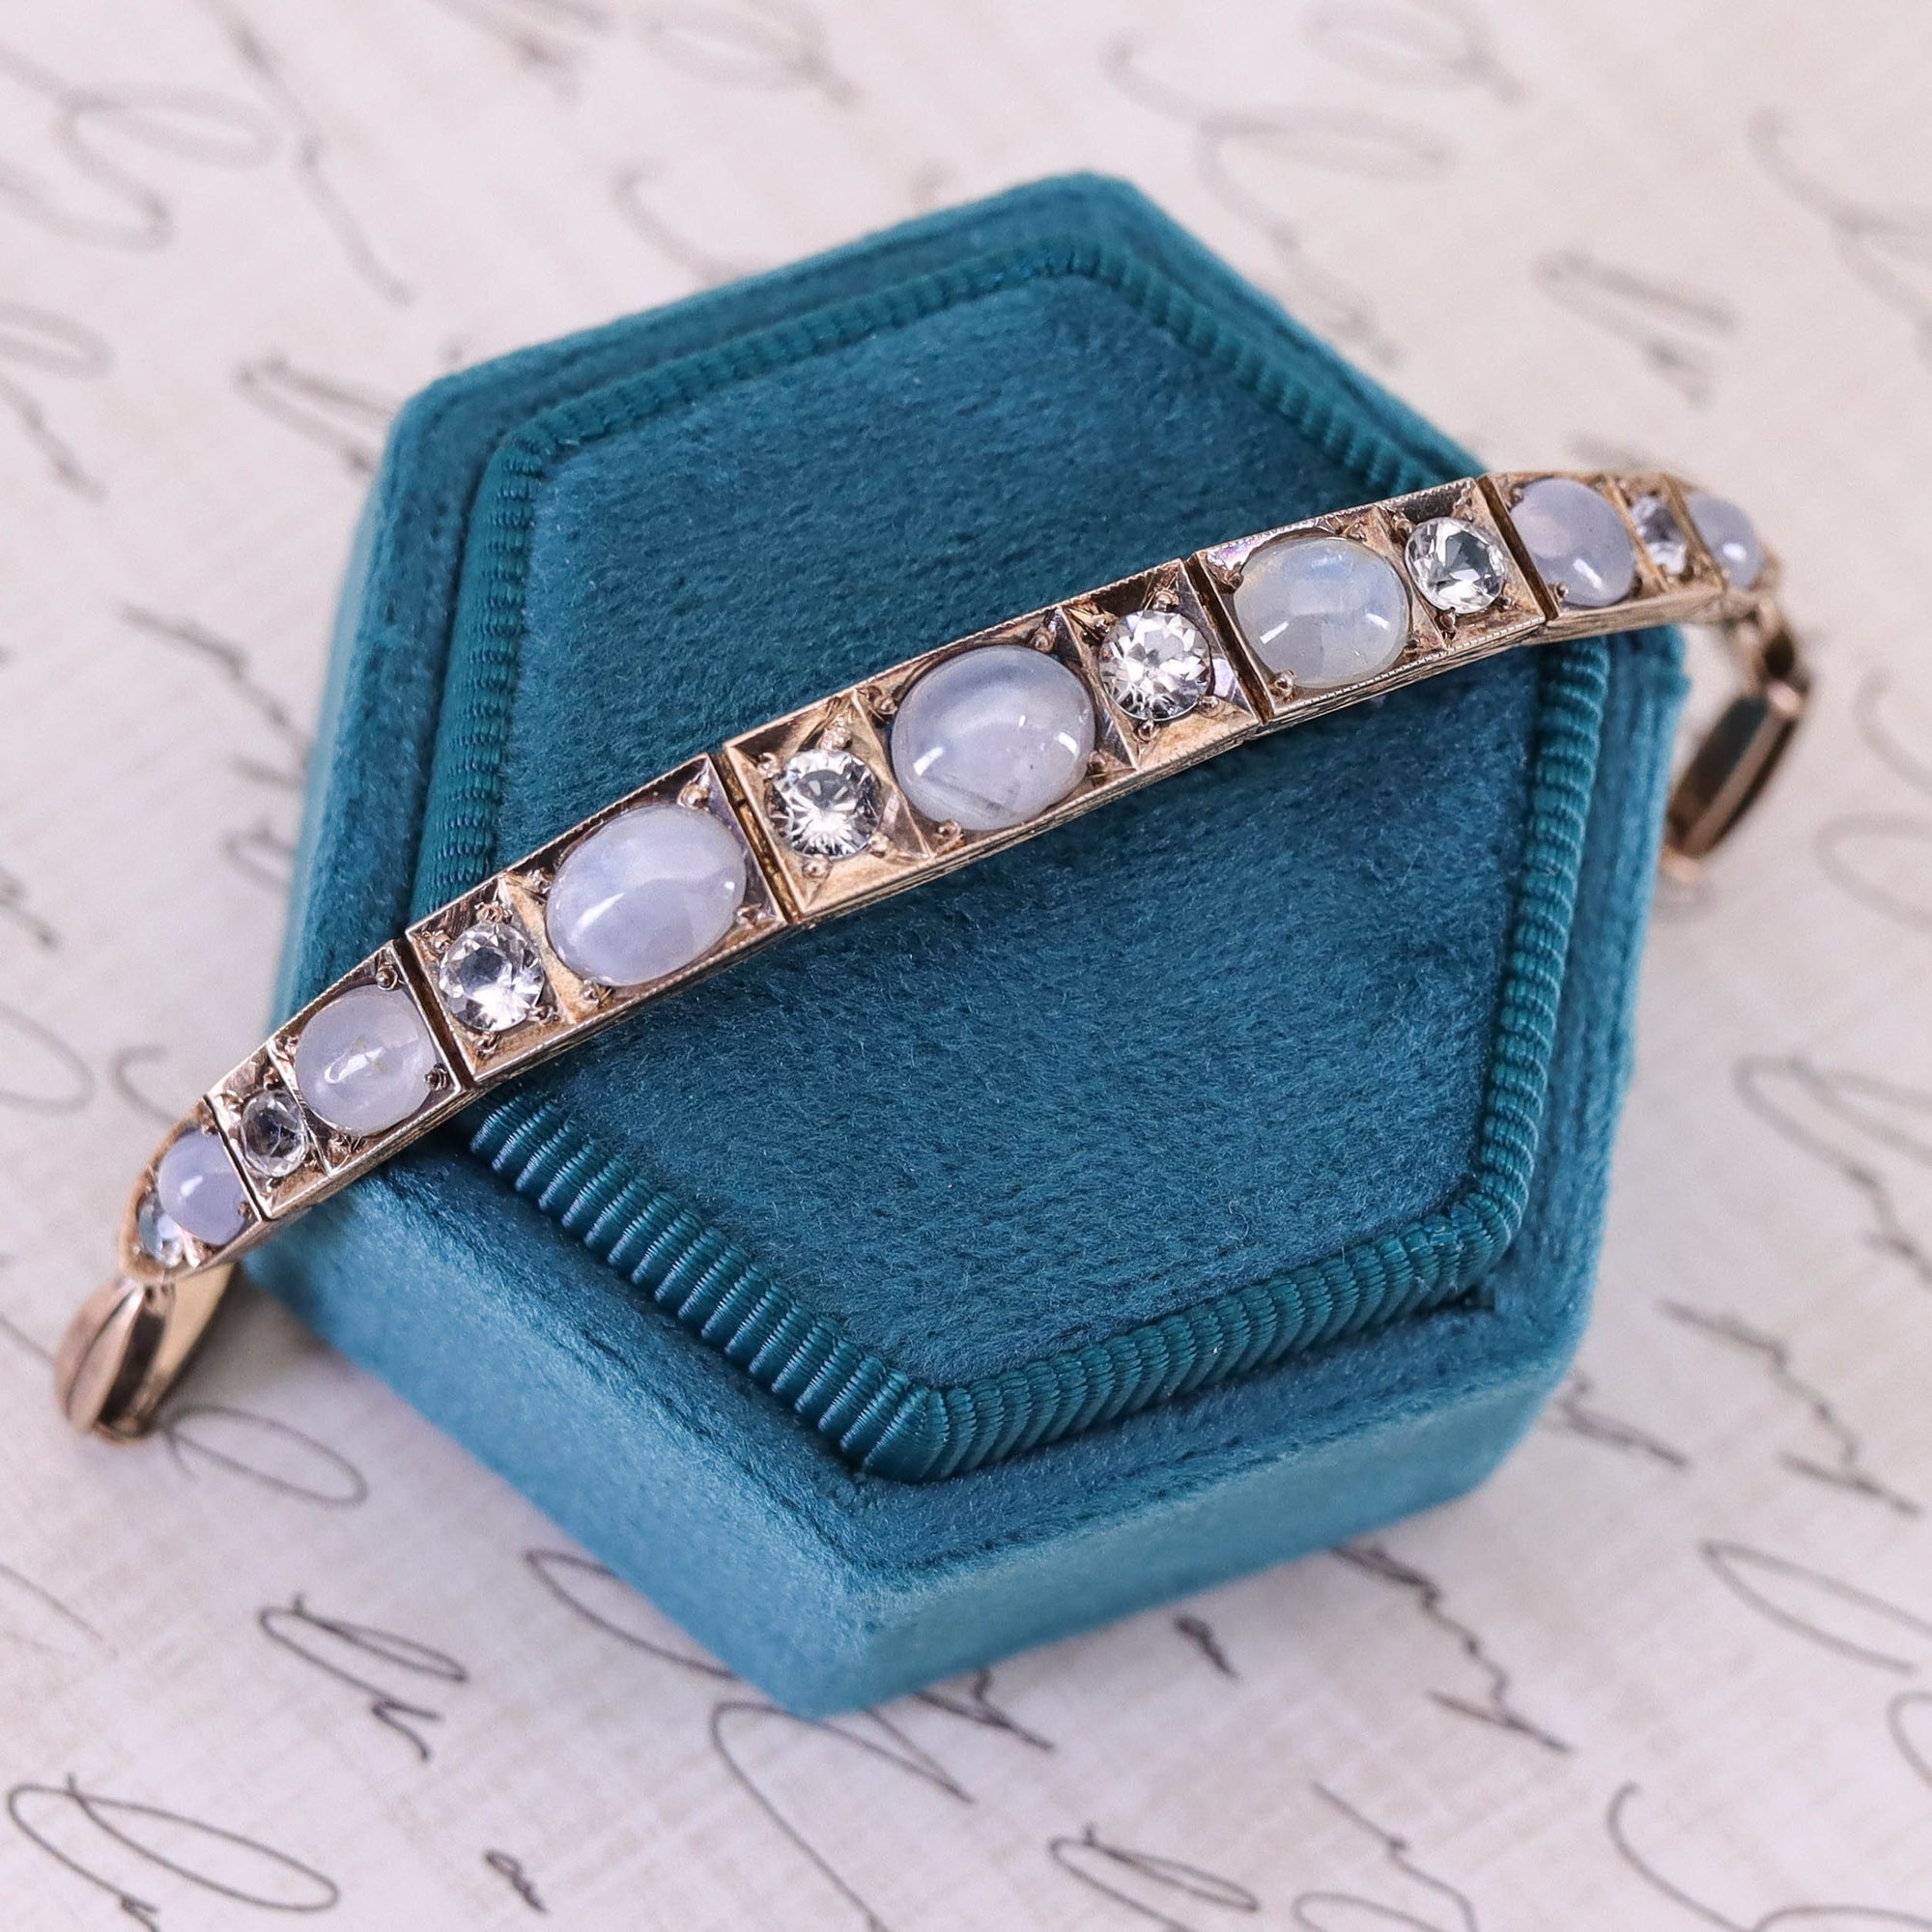 Antique Star Sapphire and White Topaz Bracelet of 9ct Gold